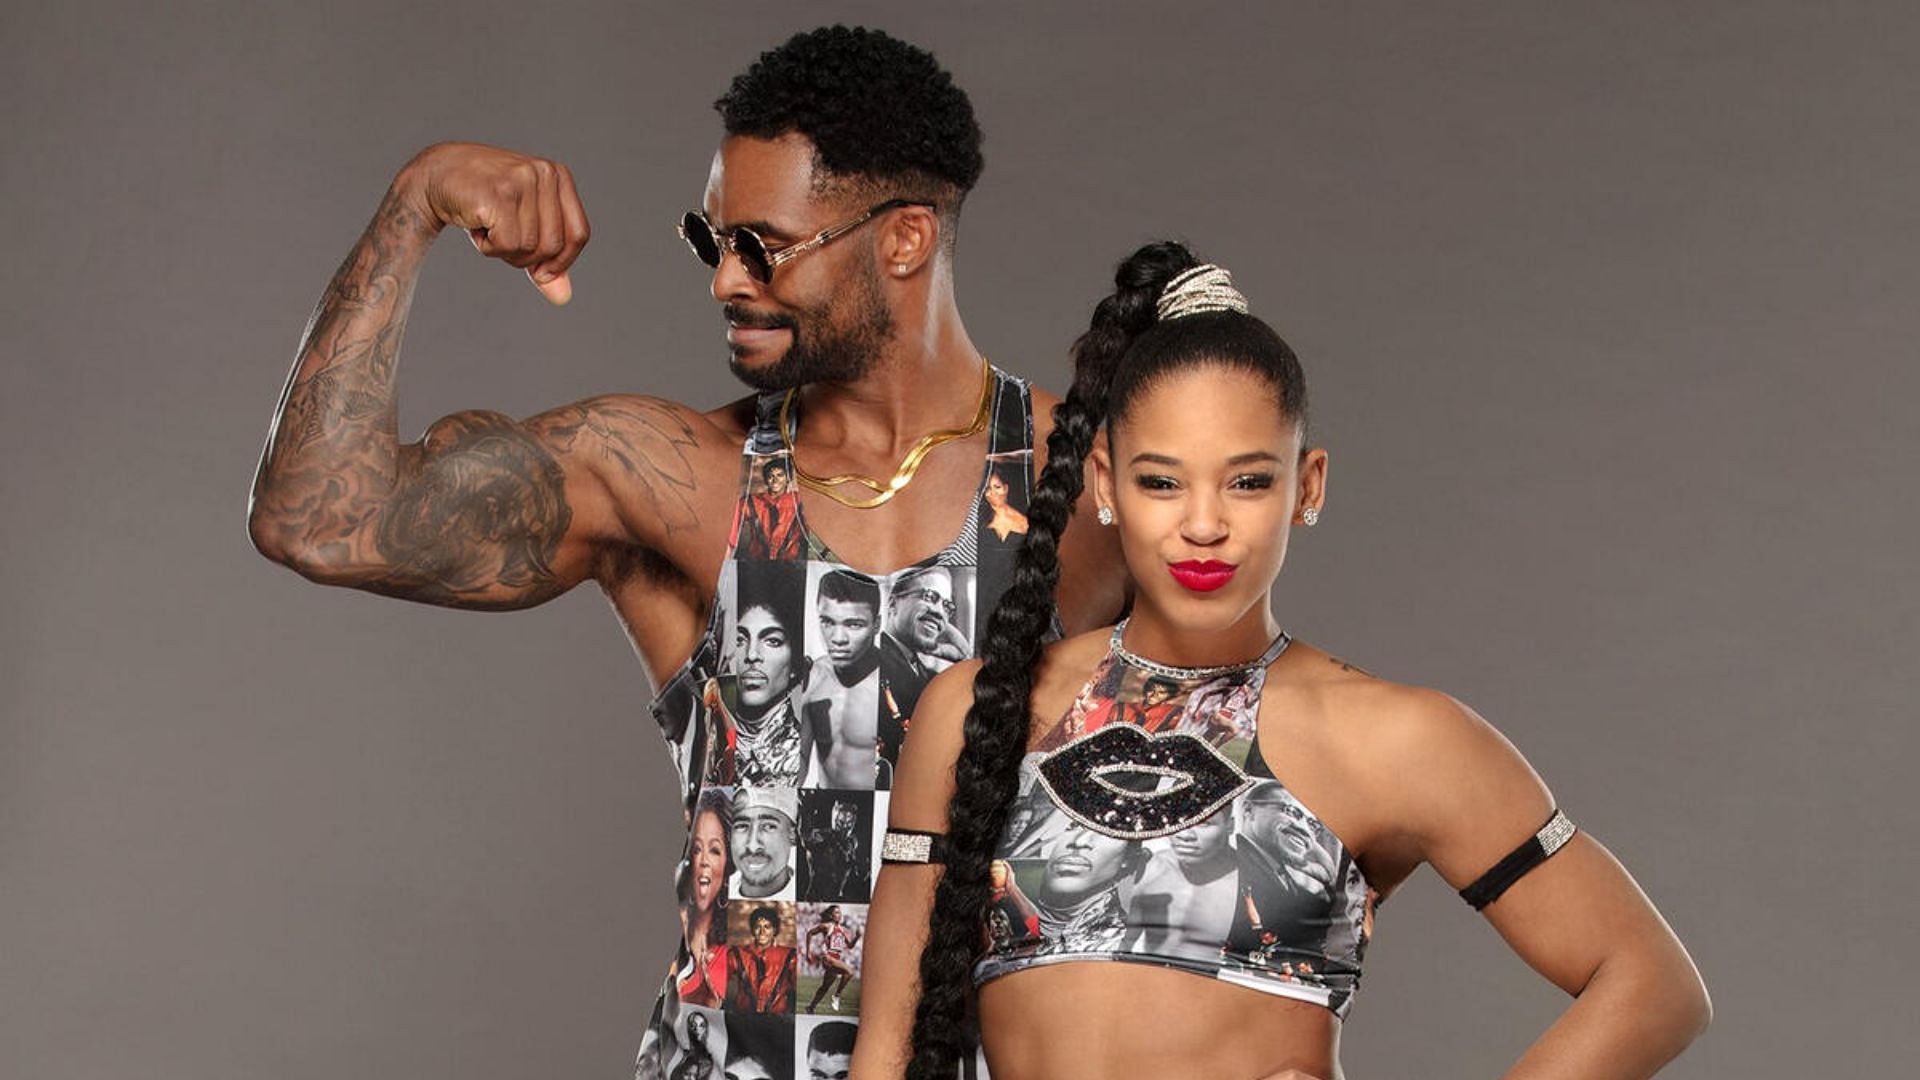 Montez Ford and Bianca Belair have been married since 2018